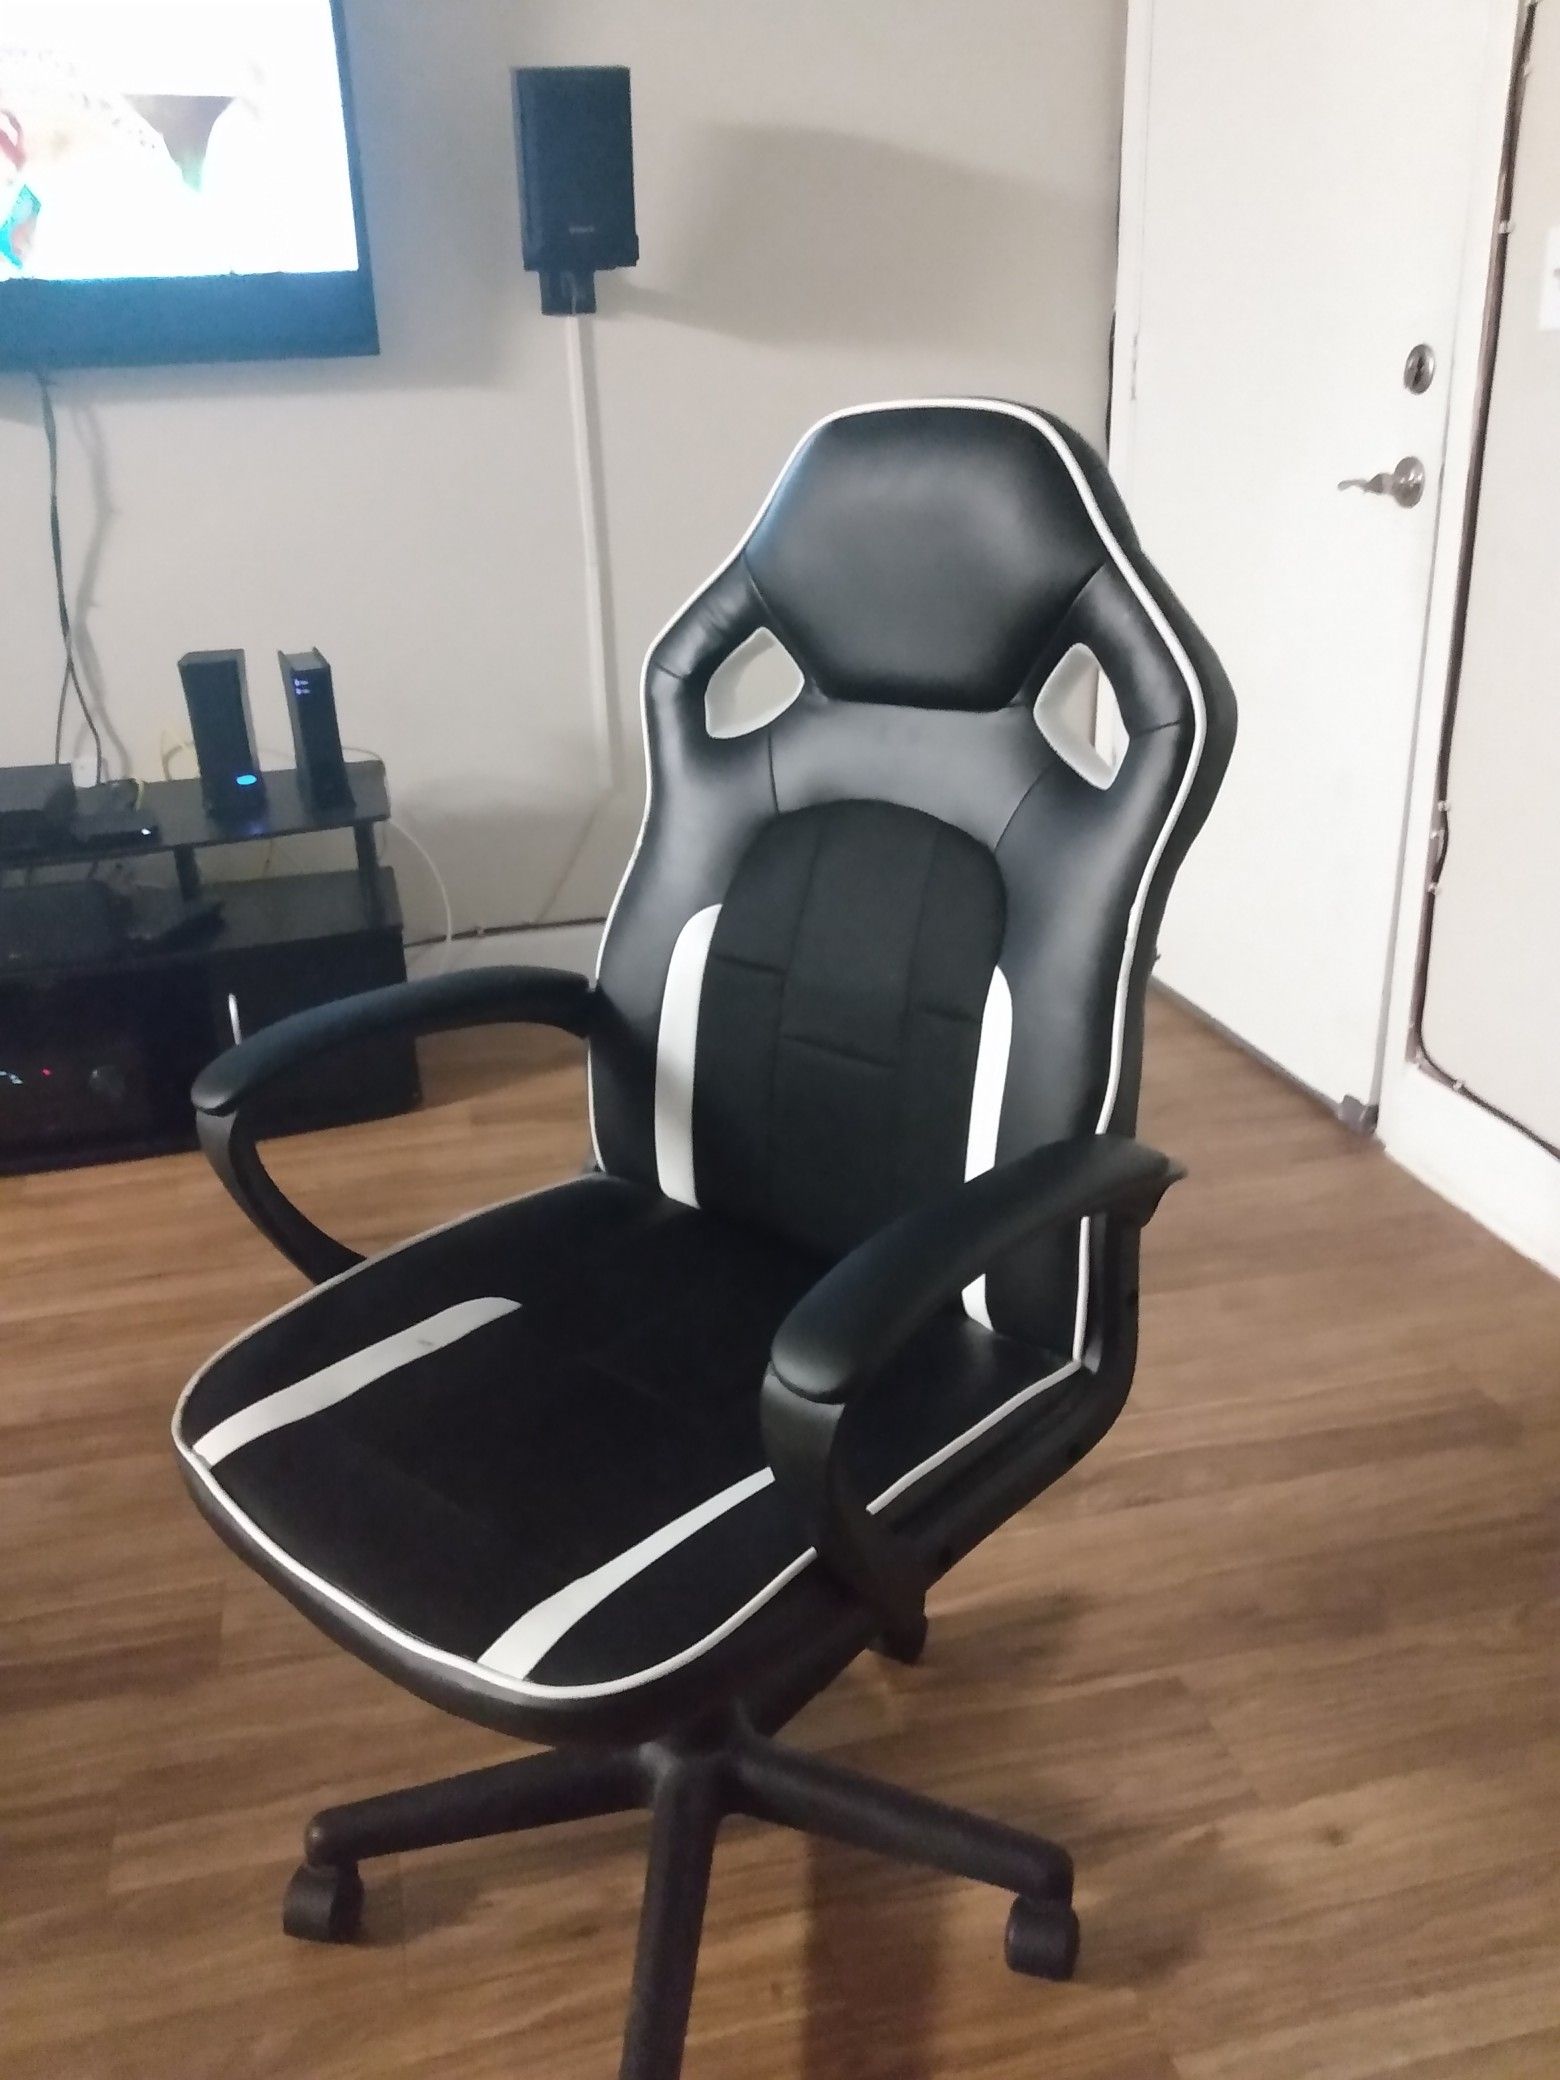 Pc Gaming chair